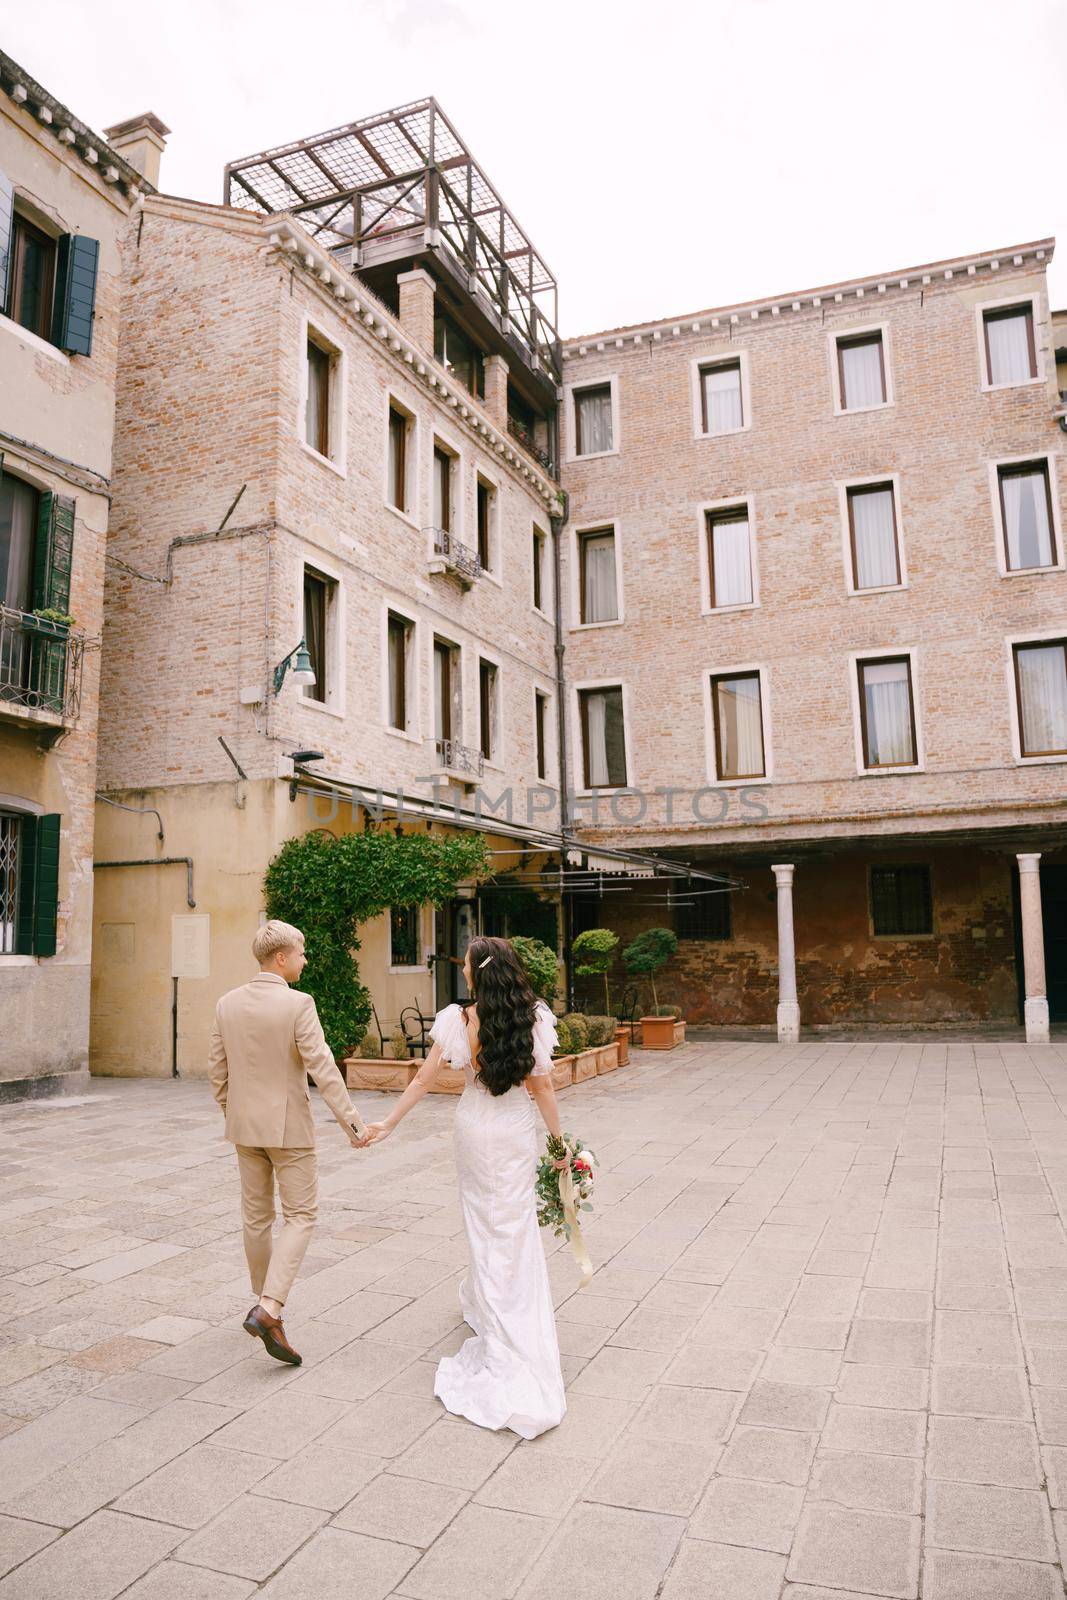 Italy wedding in Venice. The bride and groom walk through the deserted streets of the city. The newlyweds hold hands and walk against the facade of the building. by Nadtochiy